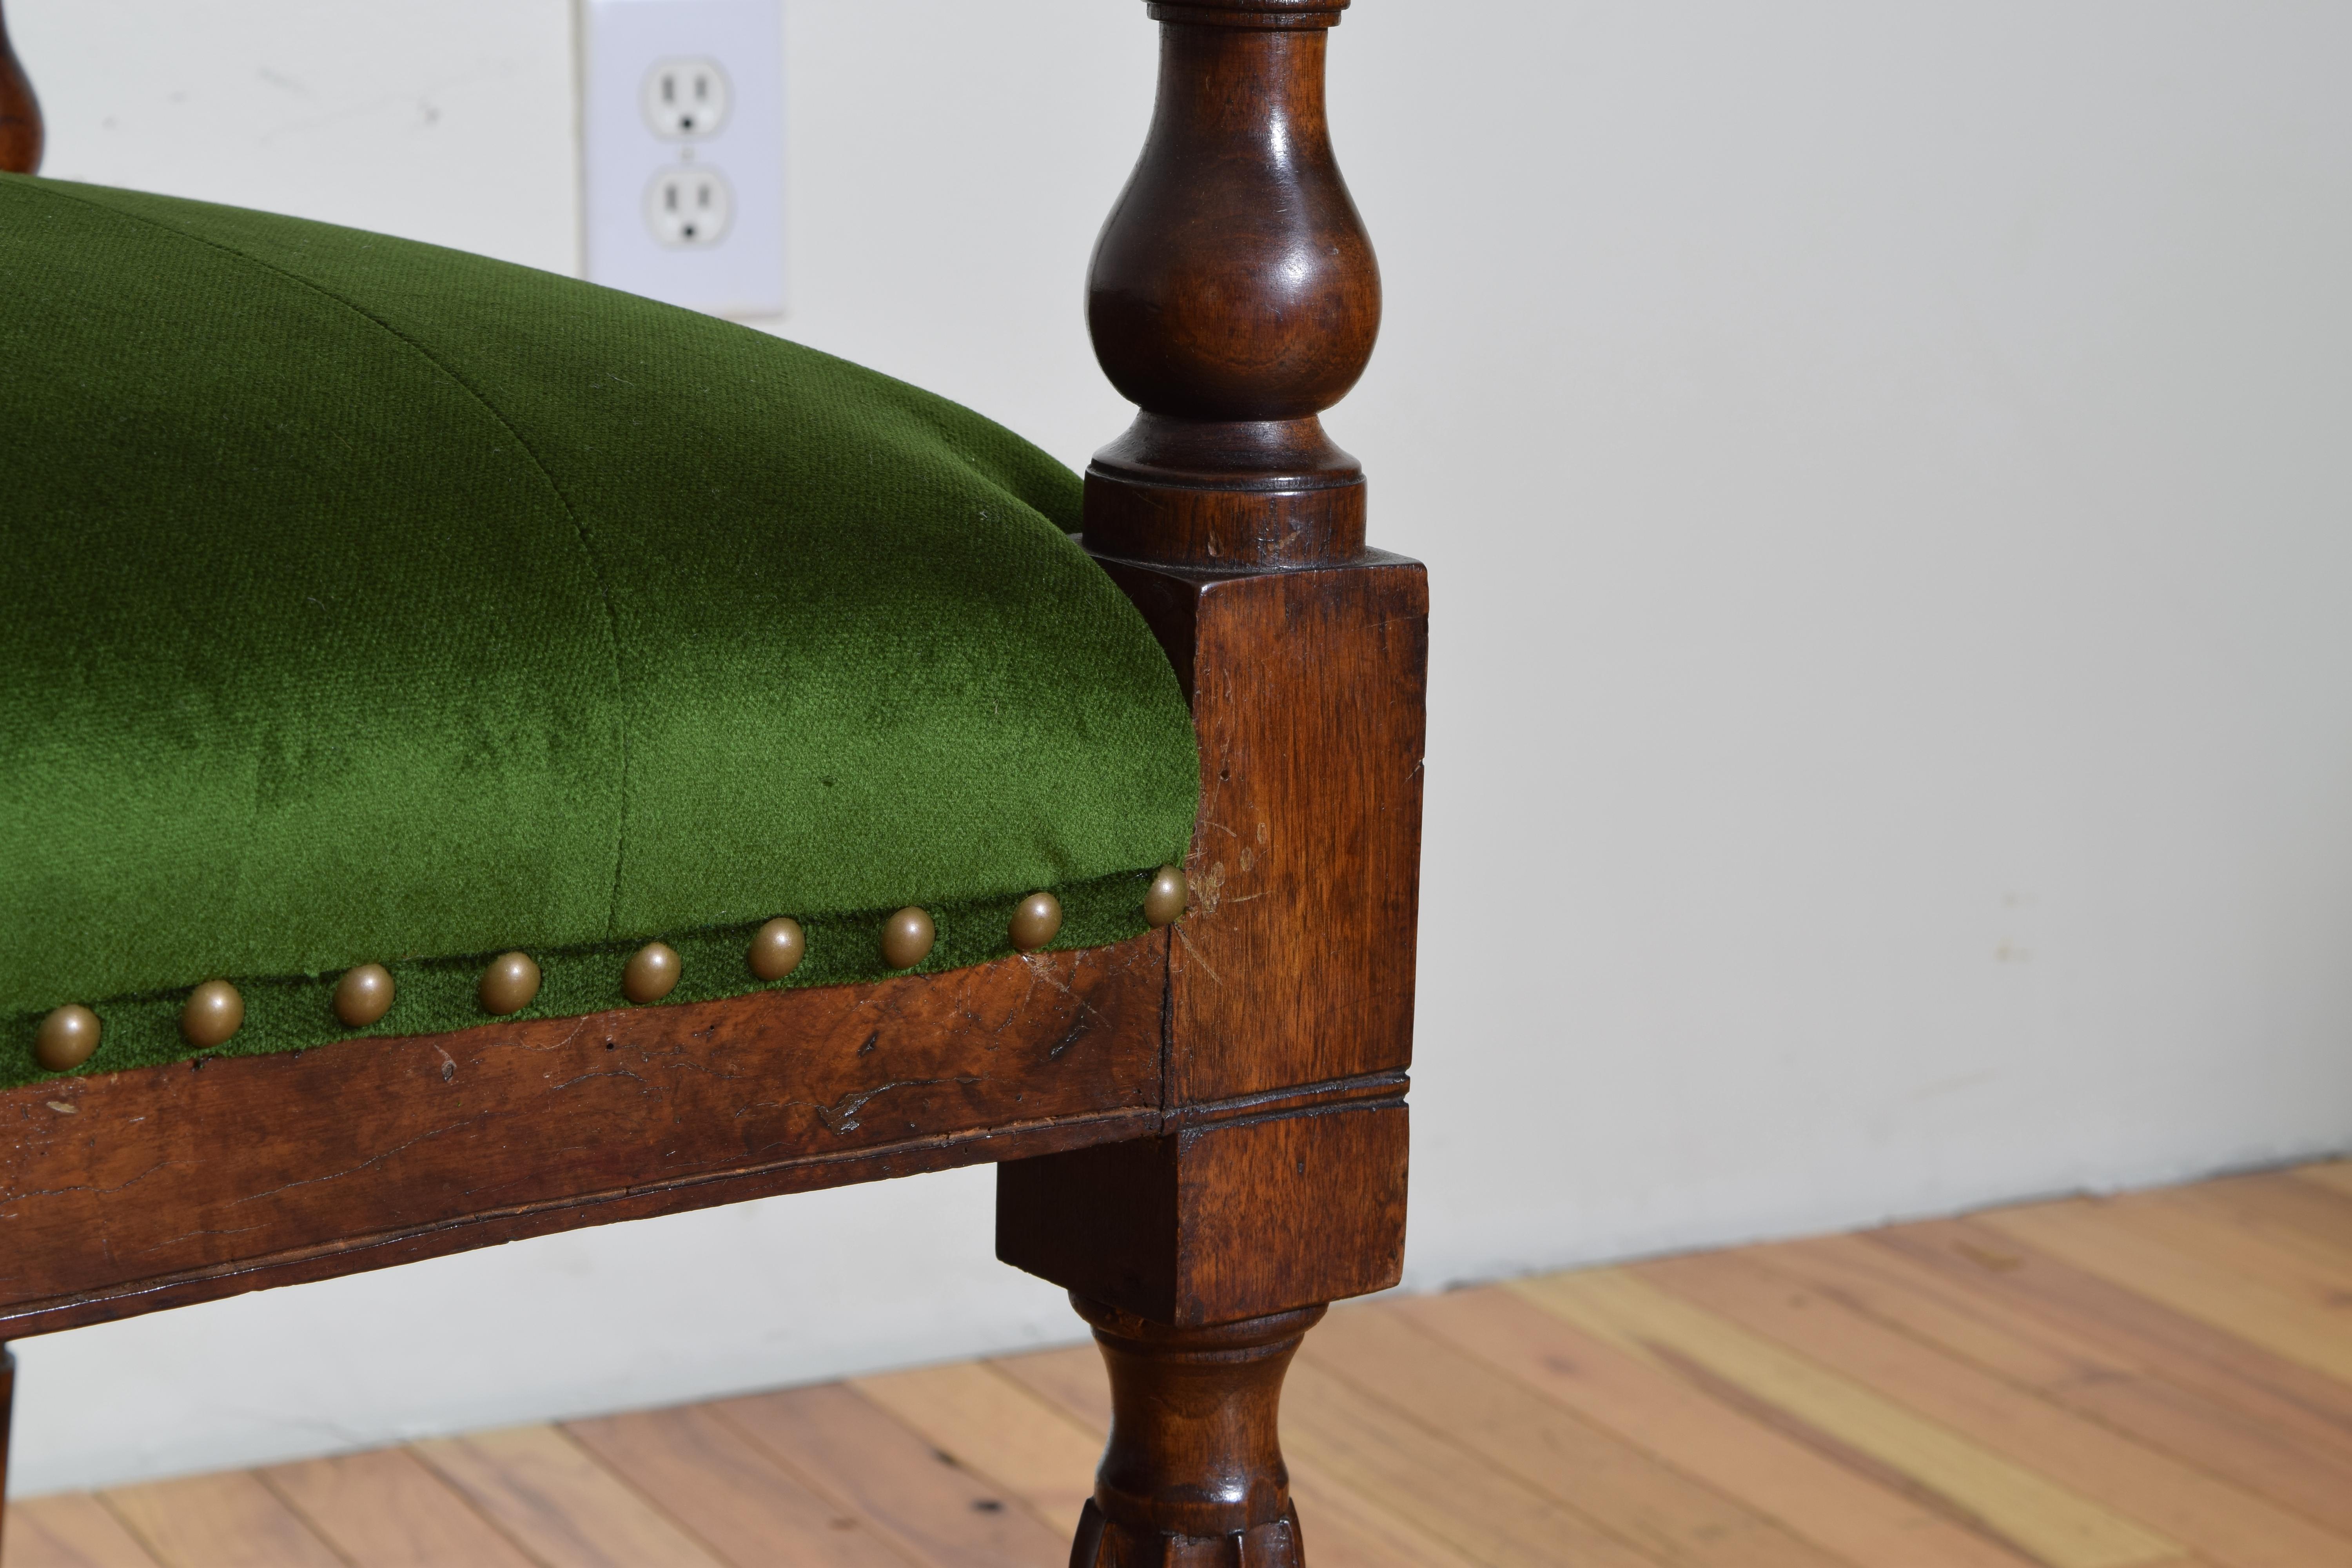 Nothern Italian Carved Walnut and Upholstered Bench Late 18th-Early 19th Century (Walnuss)